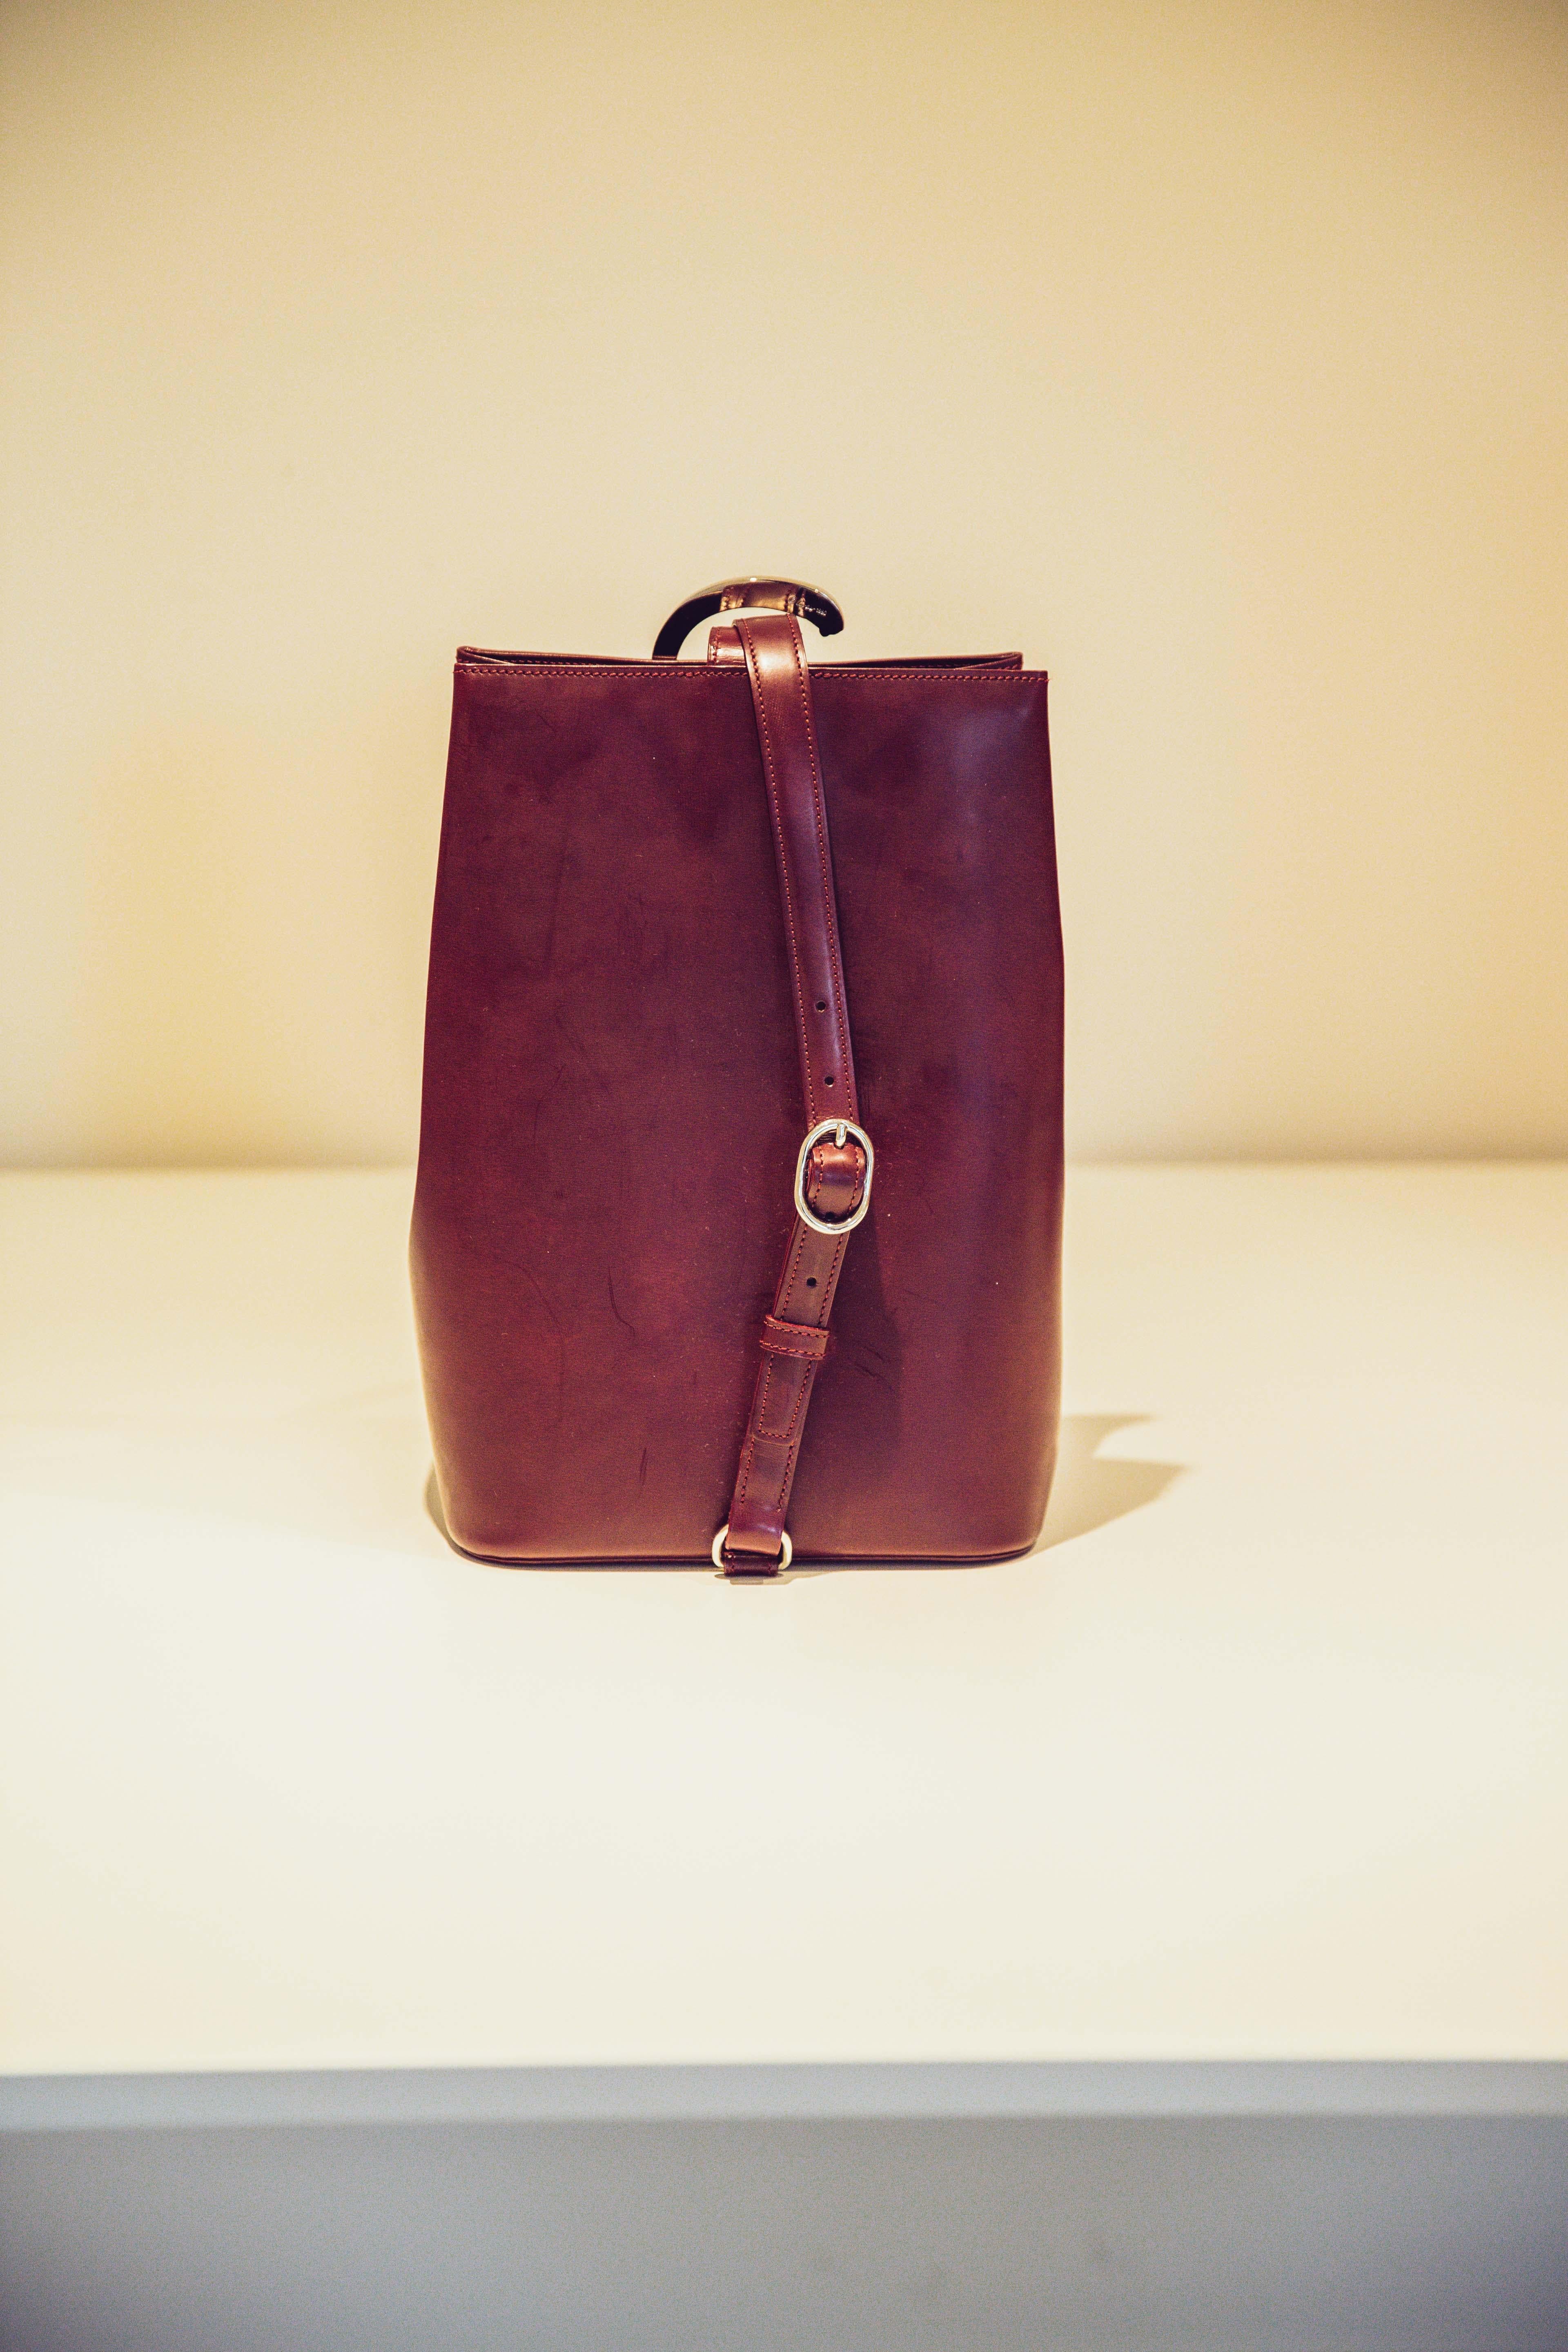 Cartier Bordeaux Leather Panthere Bucket Bag In Good Condition For Sale In Amsterdam, NL